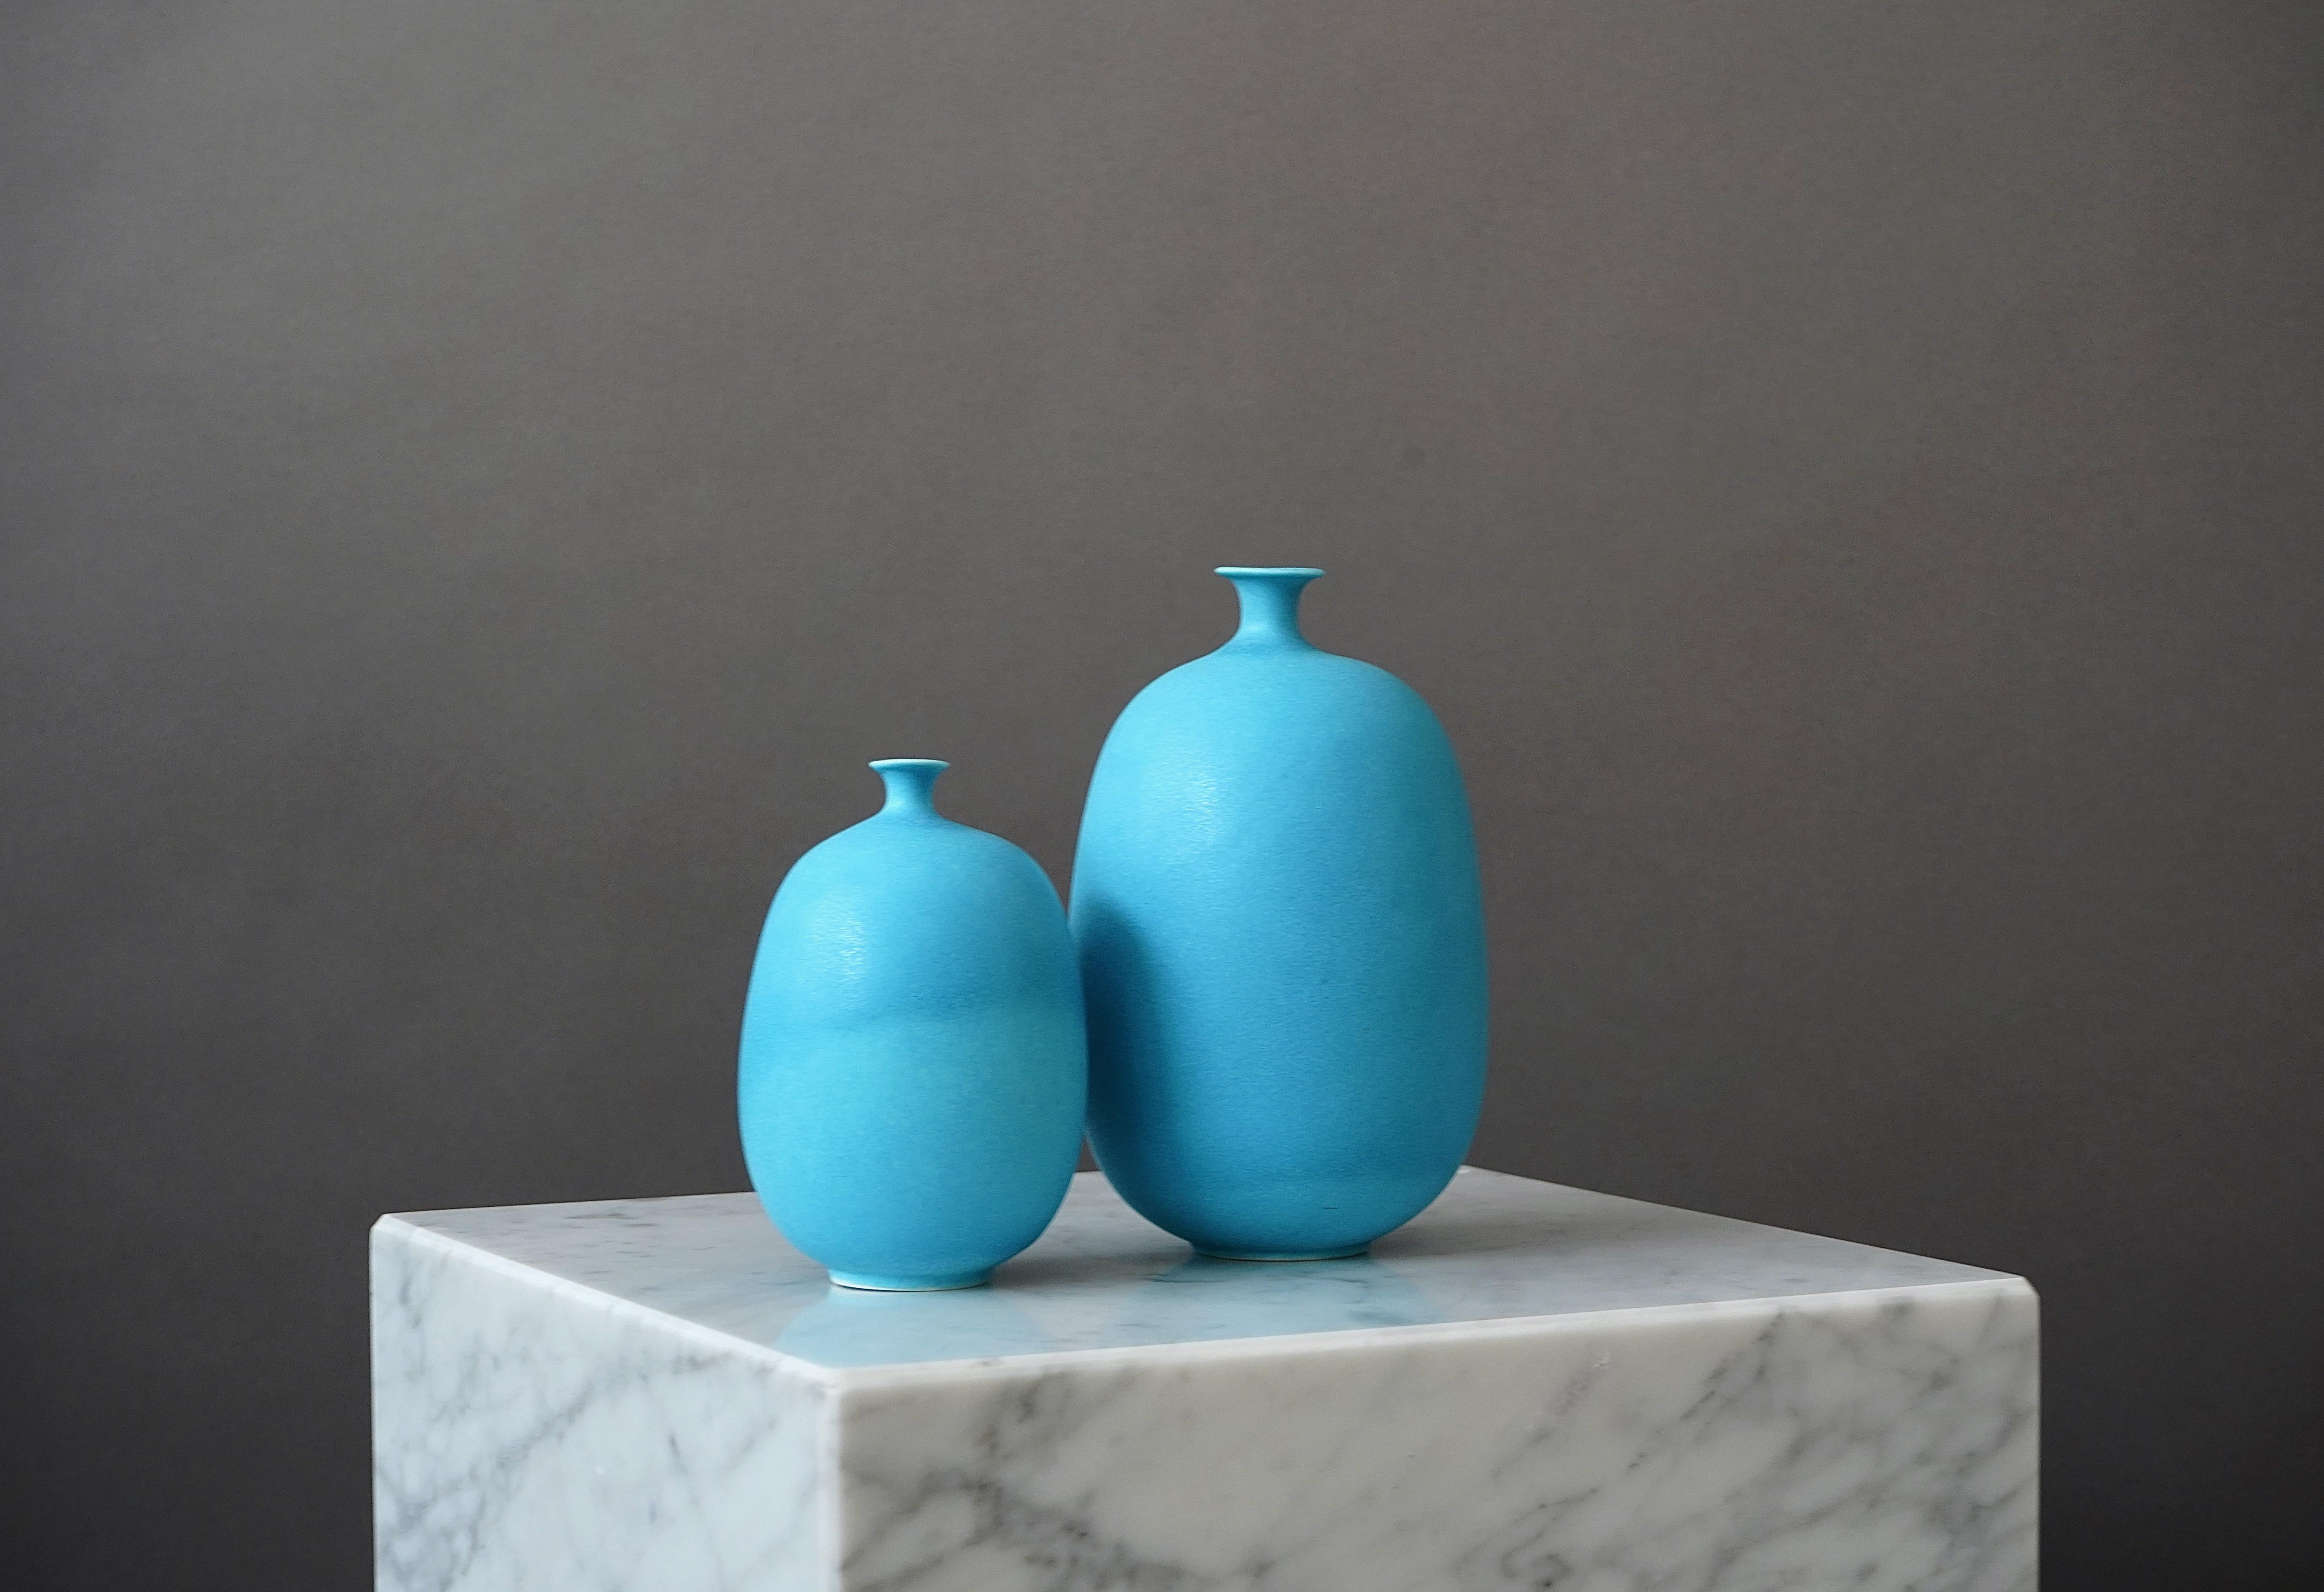 Turned Set of 2 stoneware 'Balloon' Vases by Inger Persson, Rorstrand, Sweden, 1980s